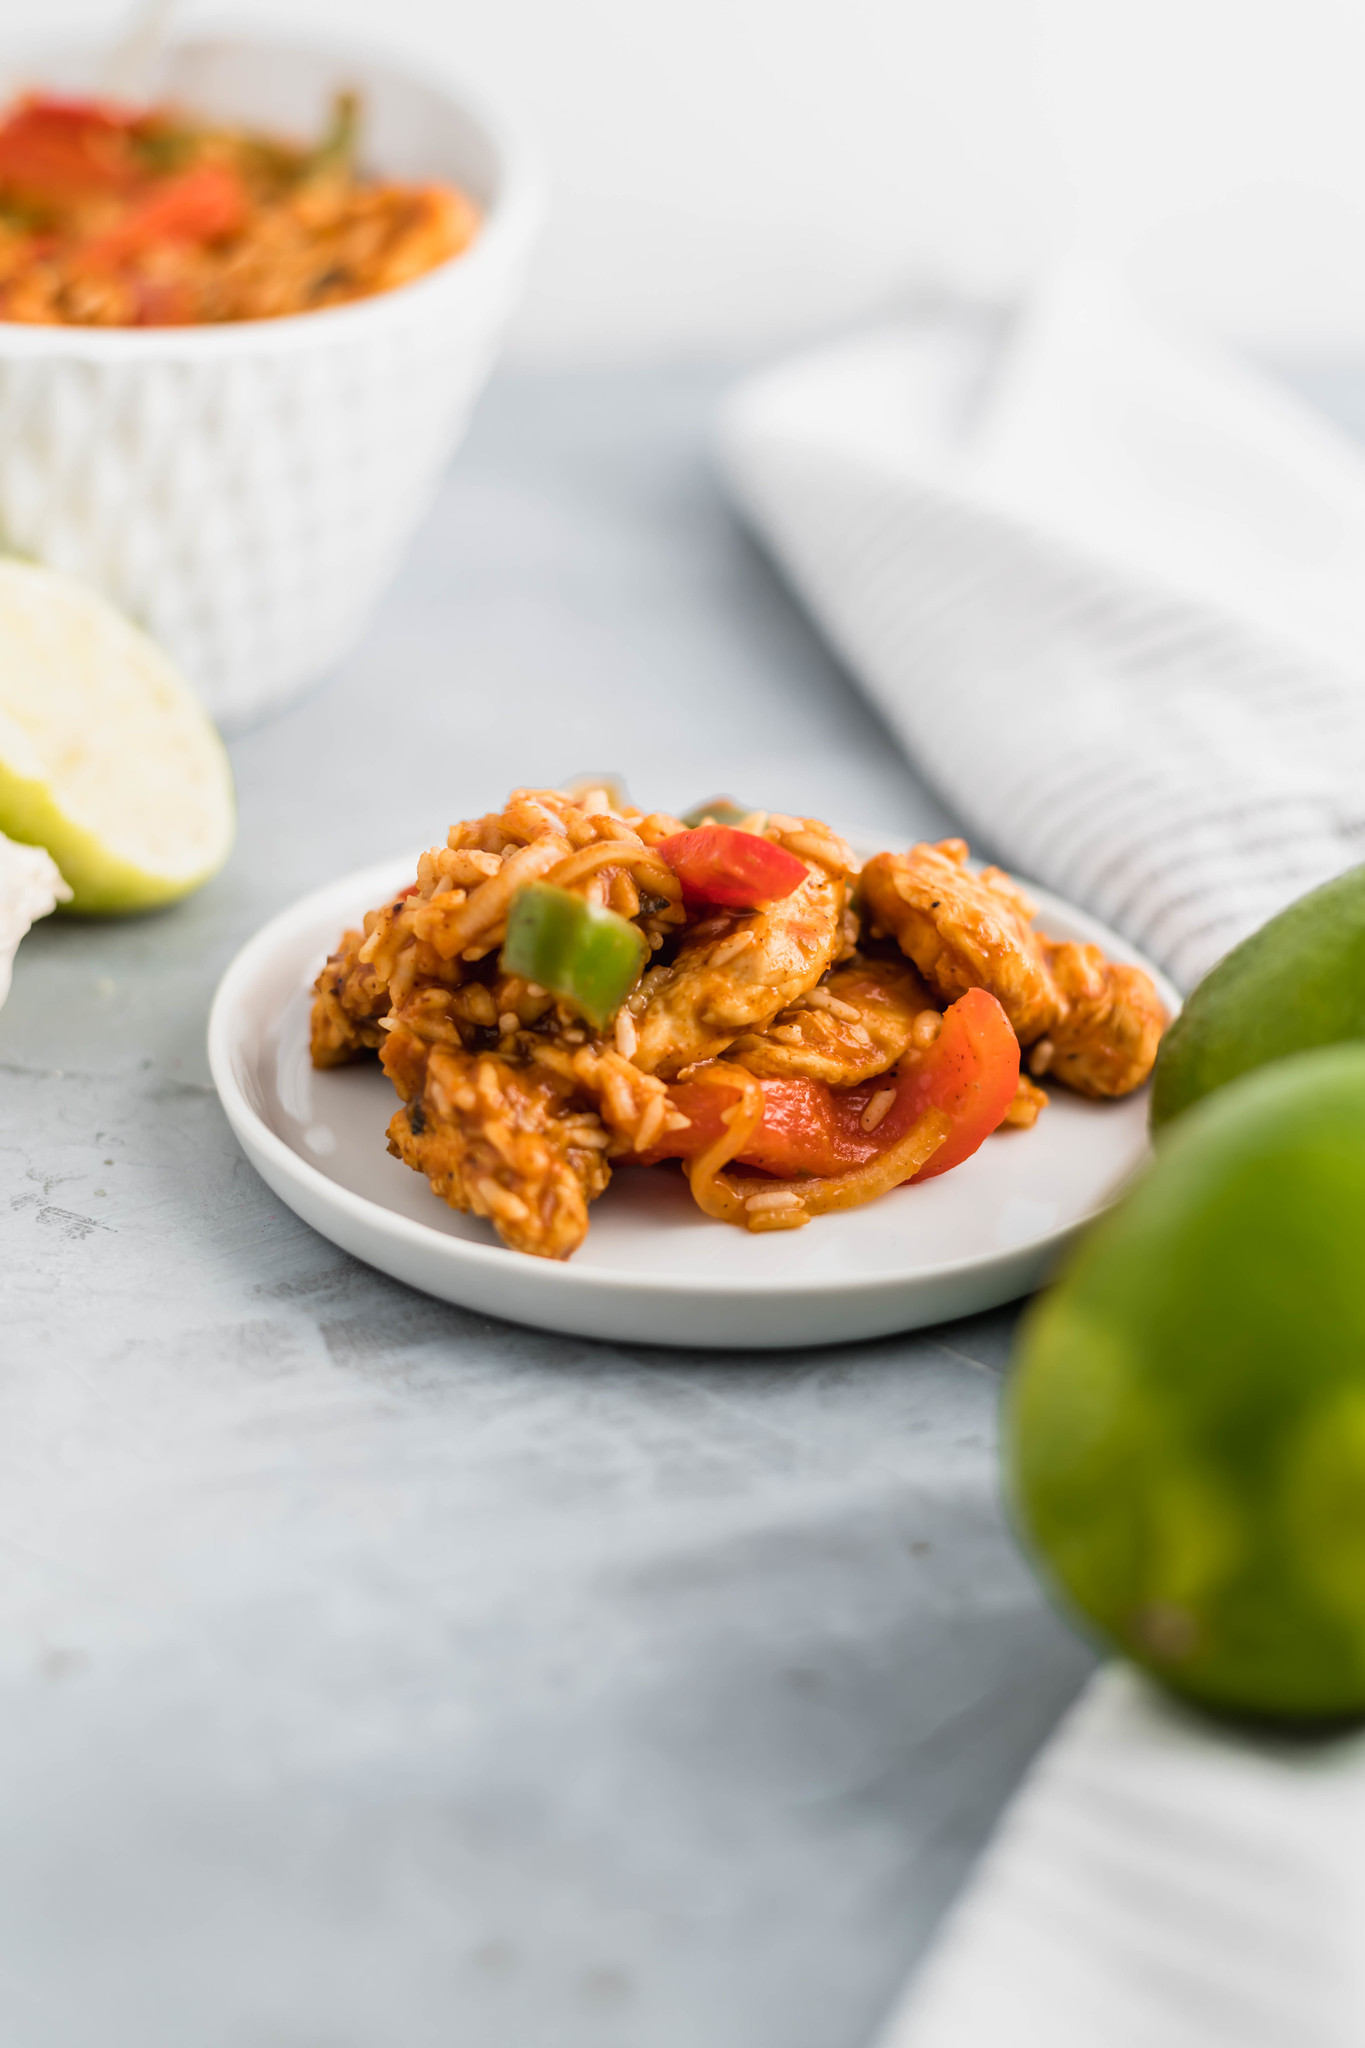 Need an easy, flavorful dinner with little effort? This Instant Pot Fajita Chicken and Rice is a meal in one pot that everyone will love.